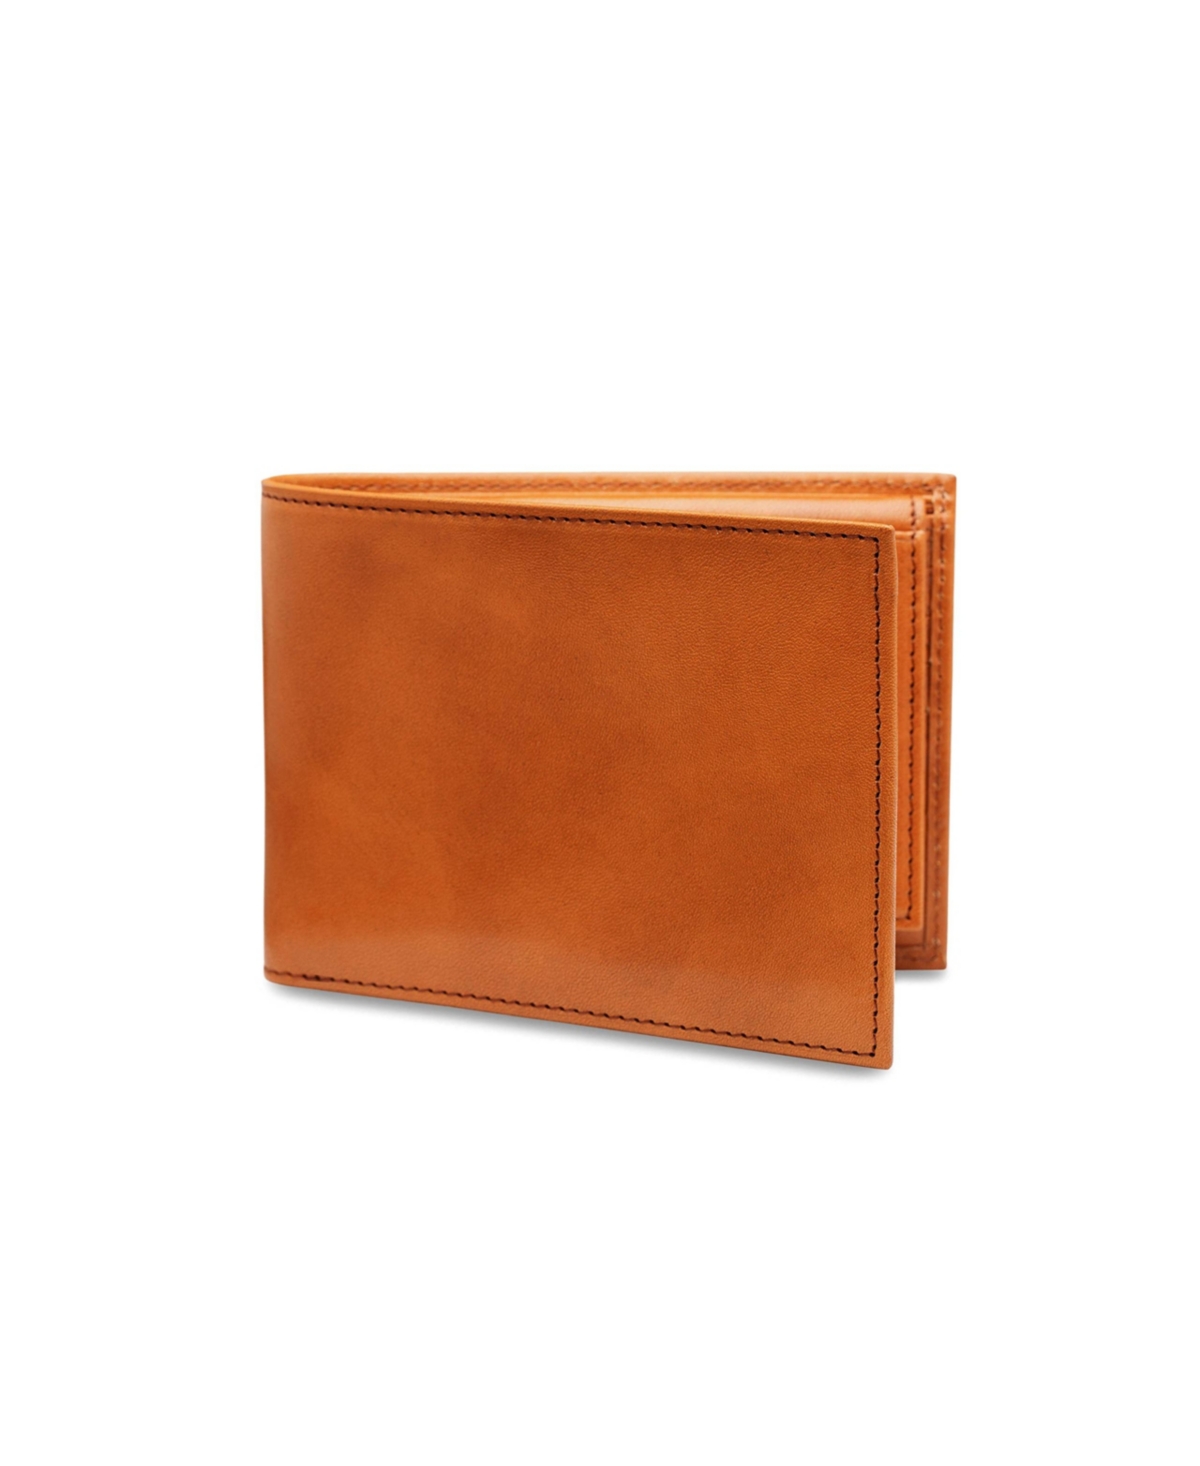 Credit Wallet w/Id Passcase - Saddle